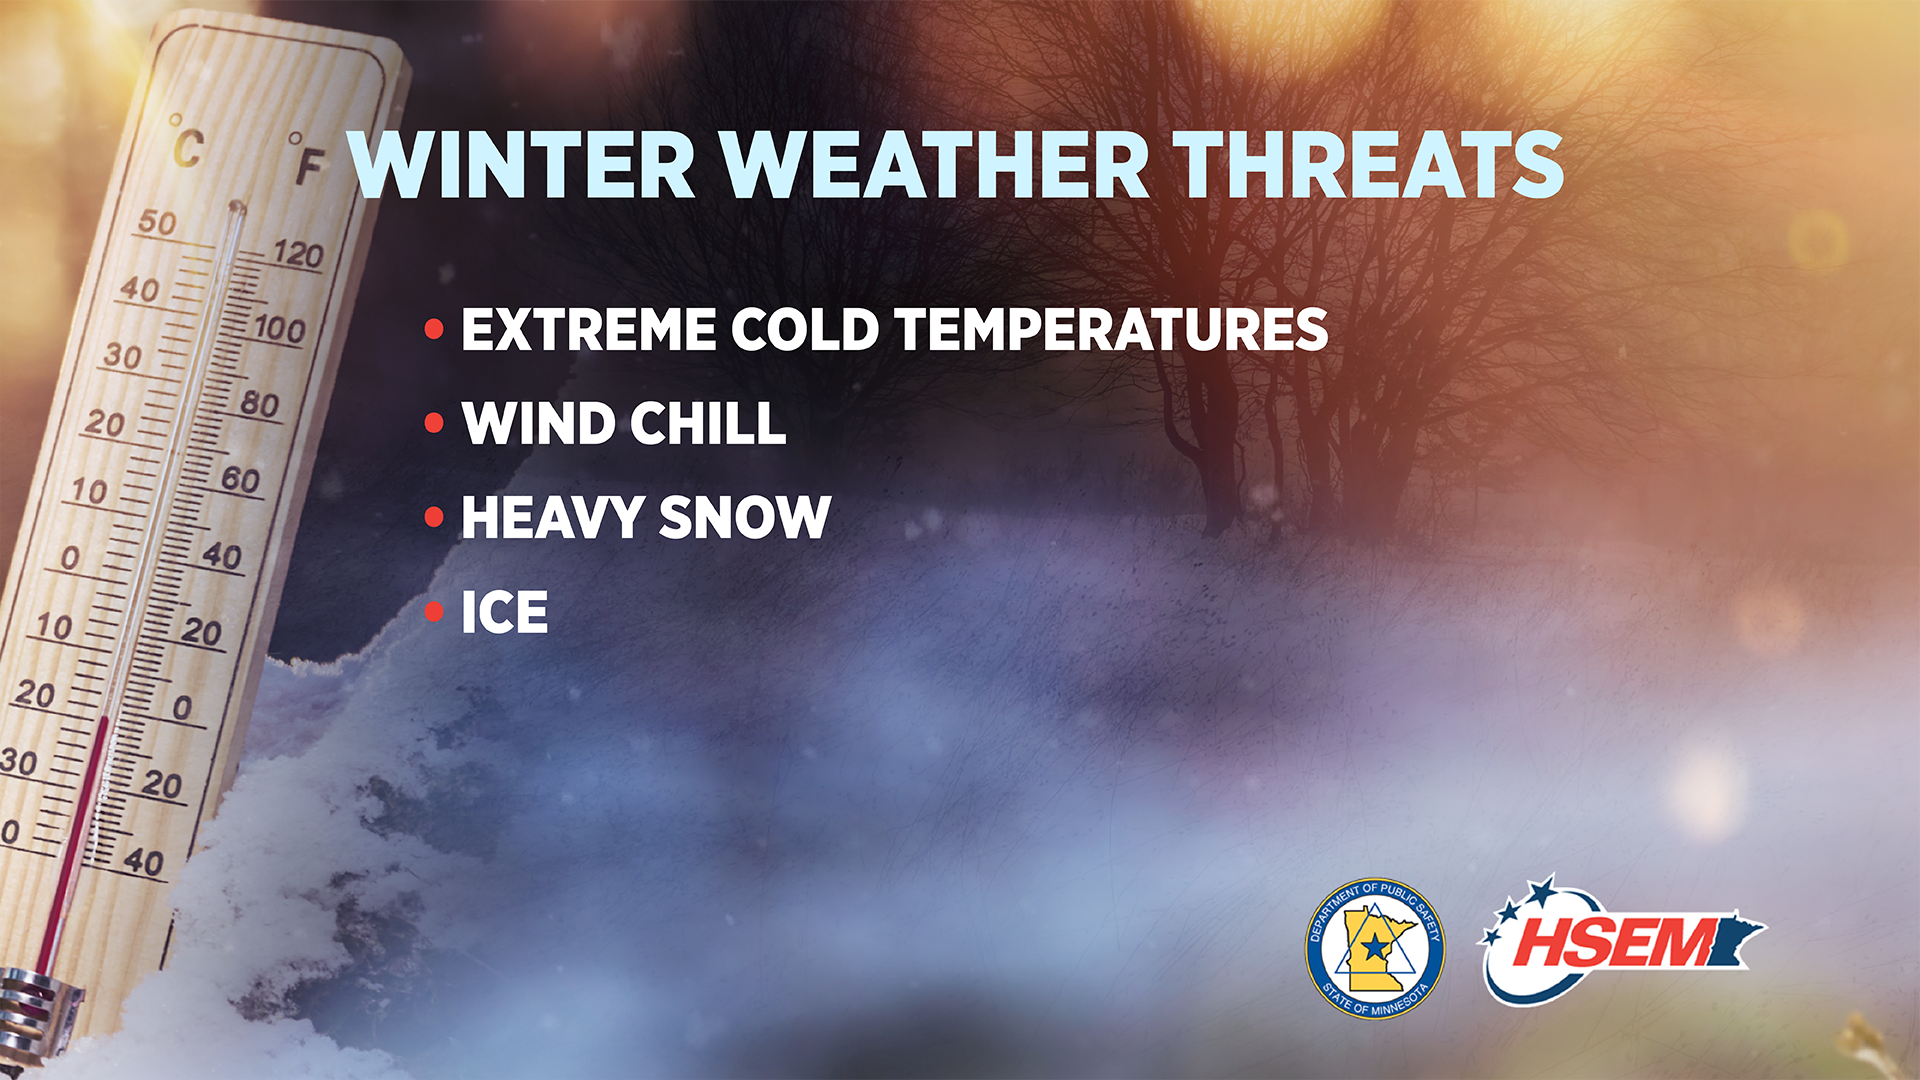 Winter Weather Threats Infographic